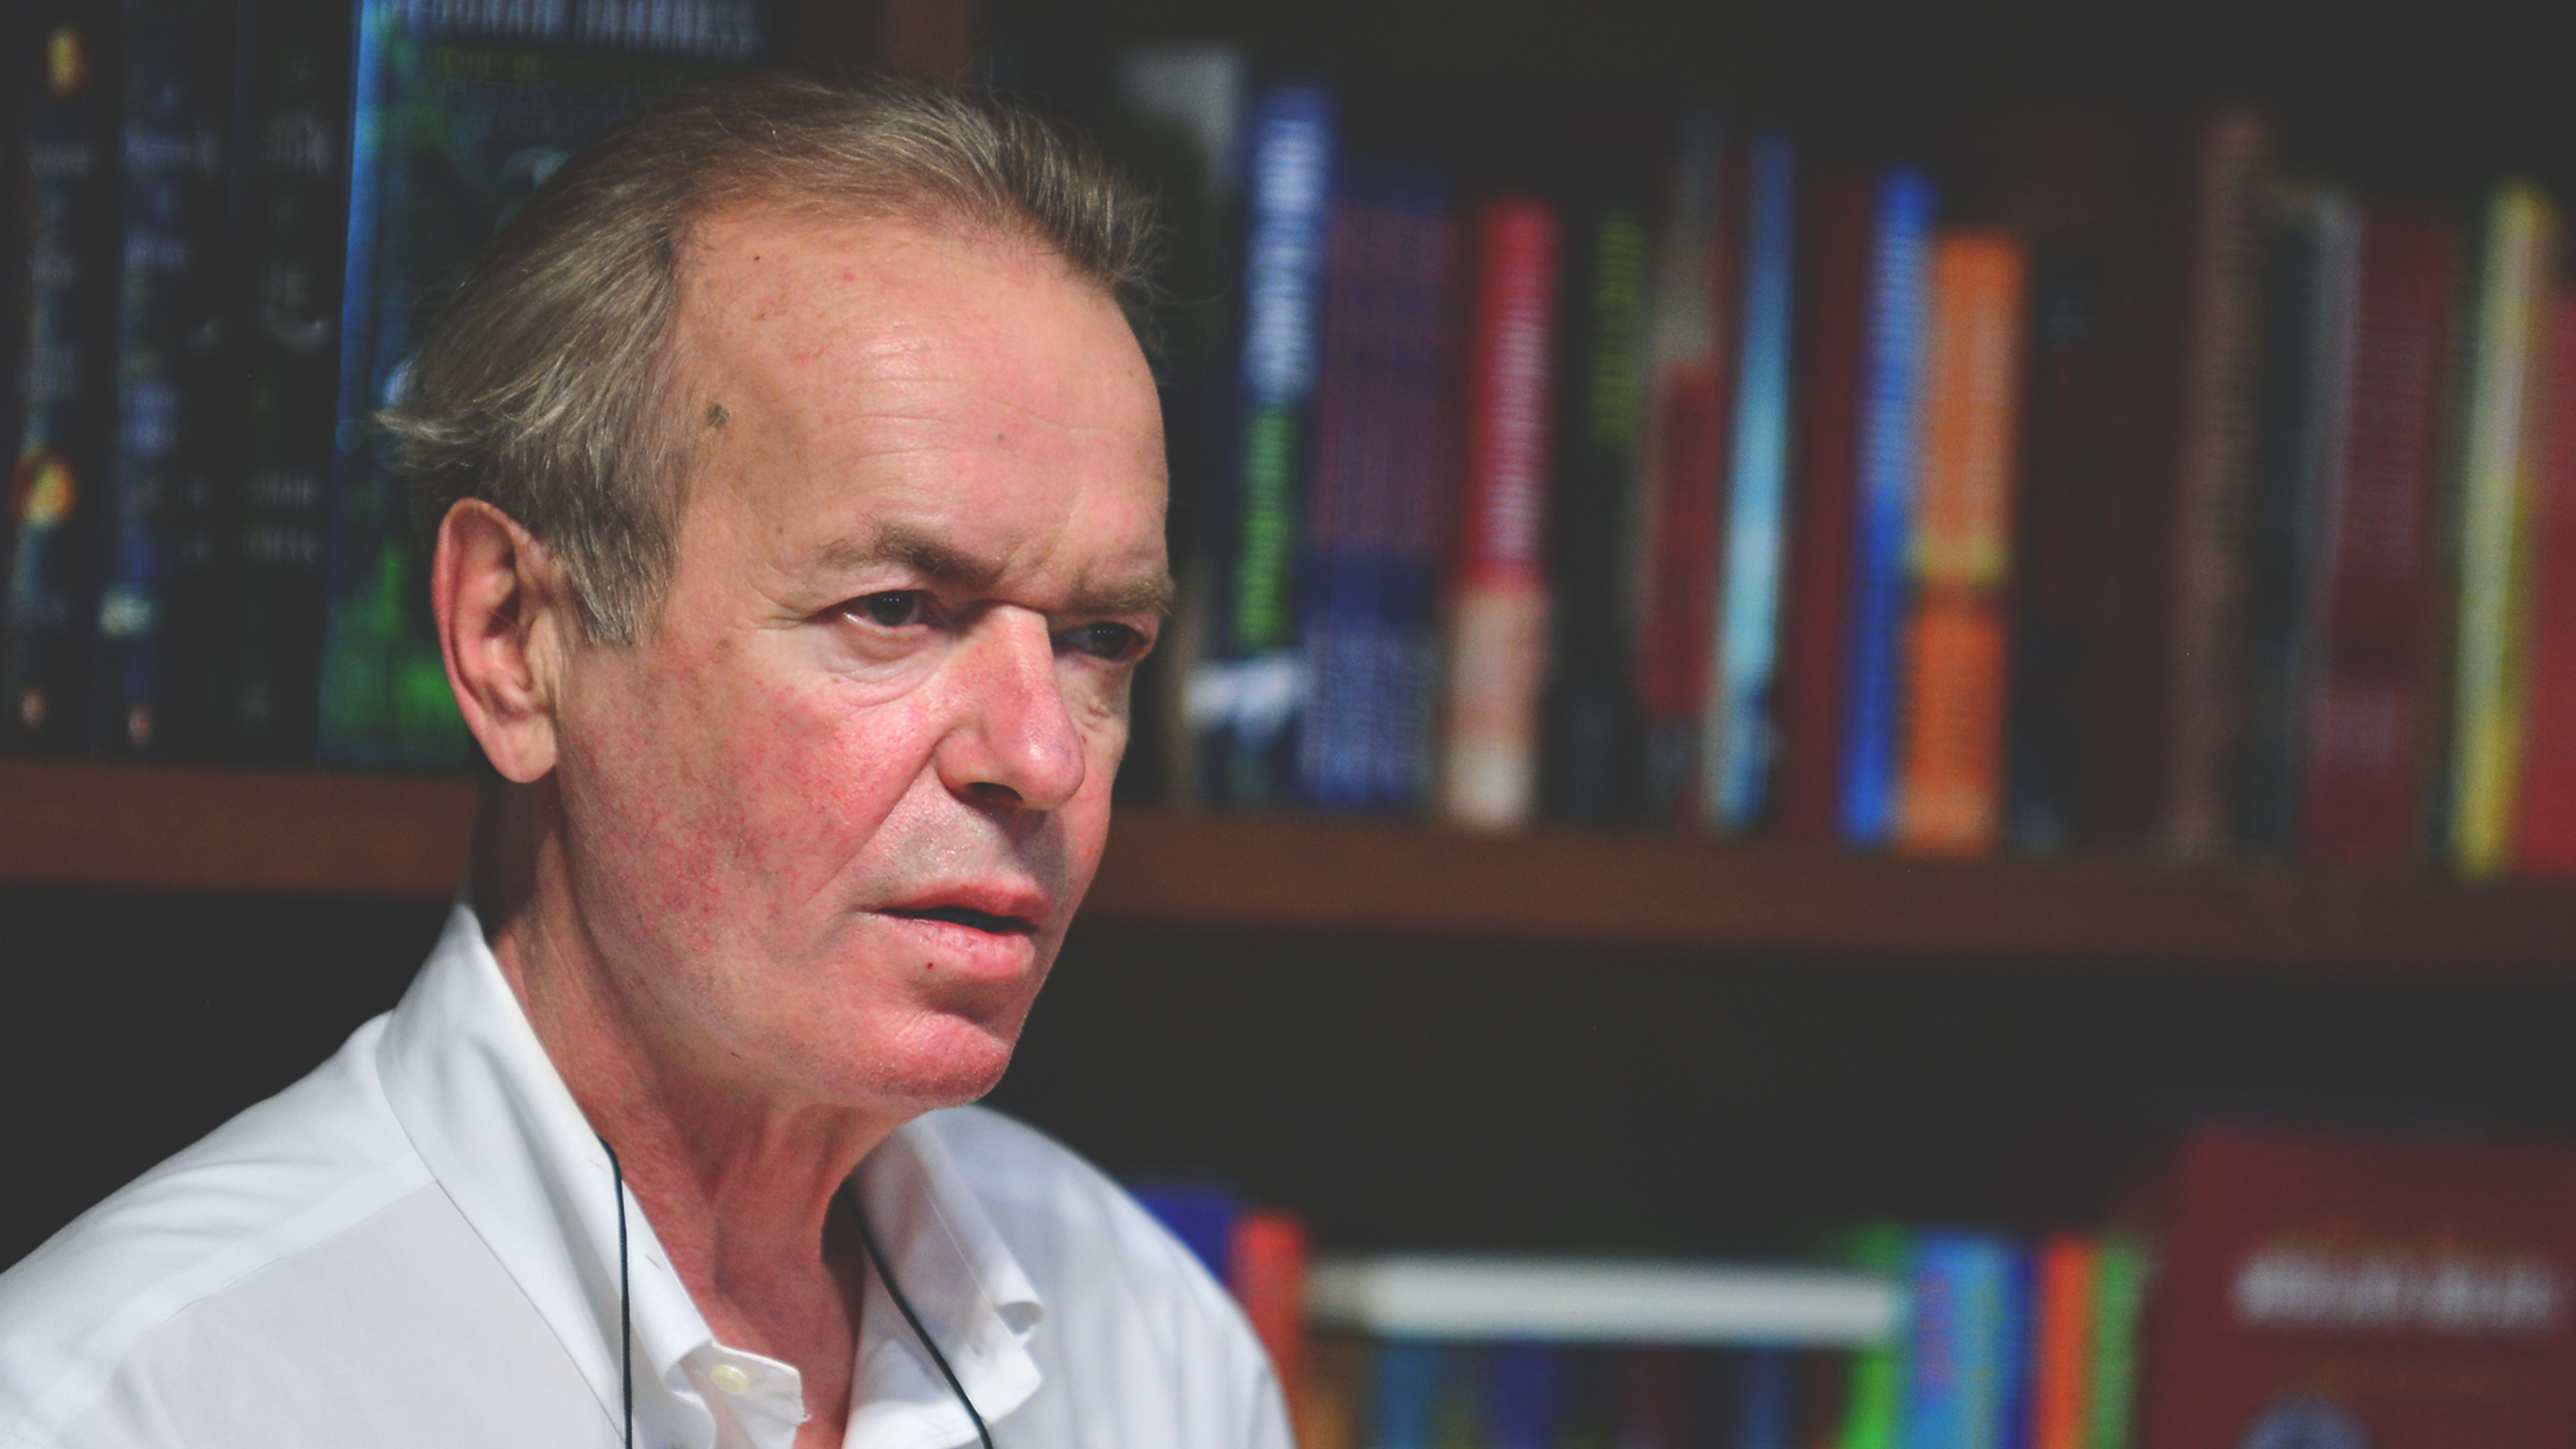 16 years ago, Martin Amis unwittingly encapsulated the problem with AI-generated writing